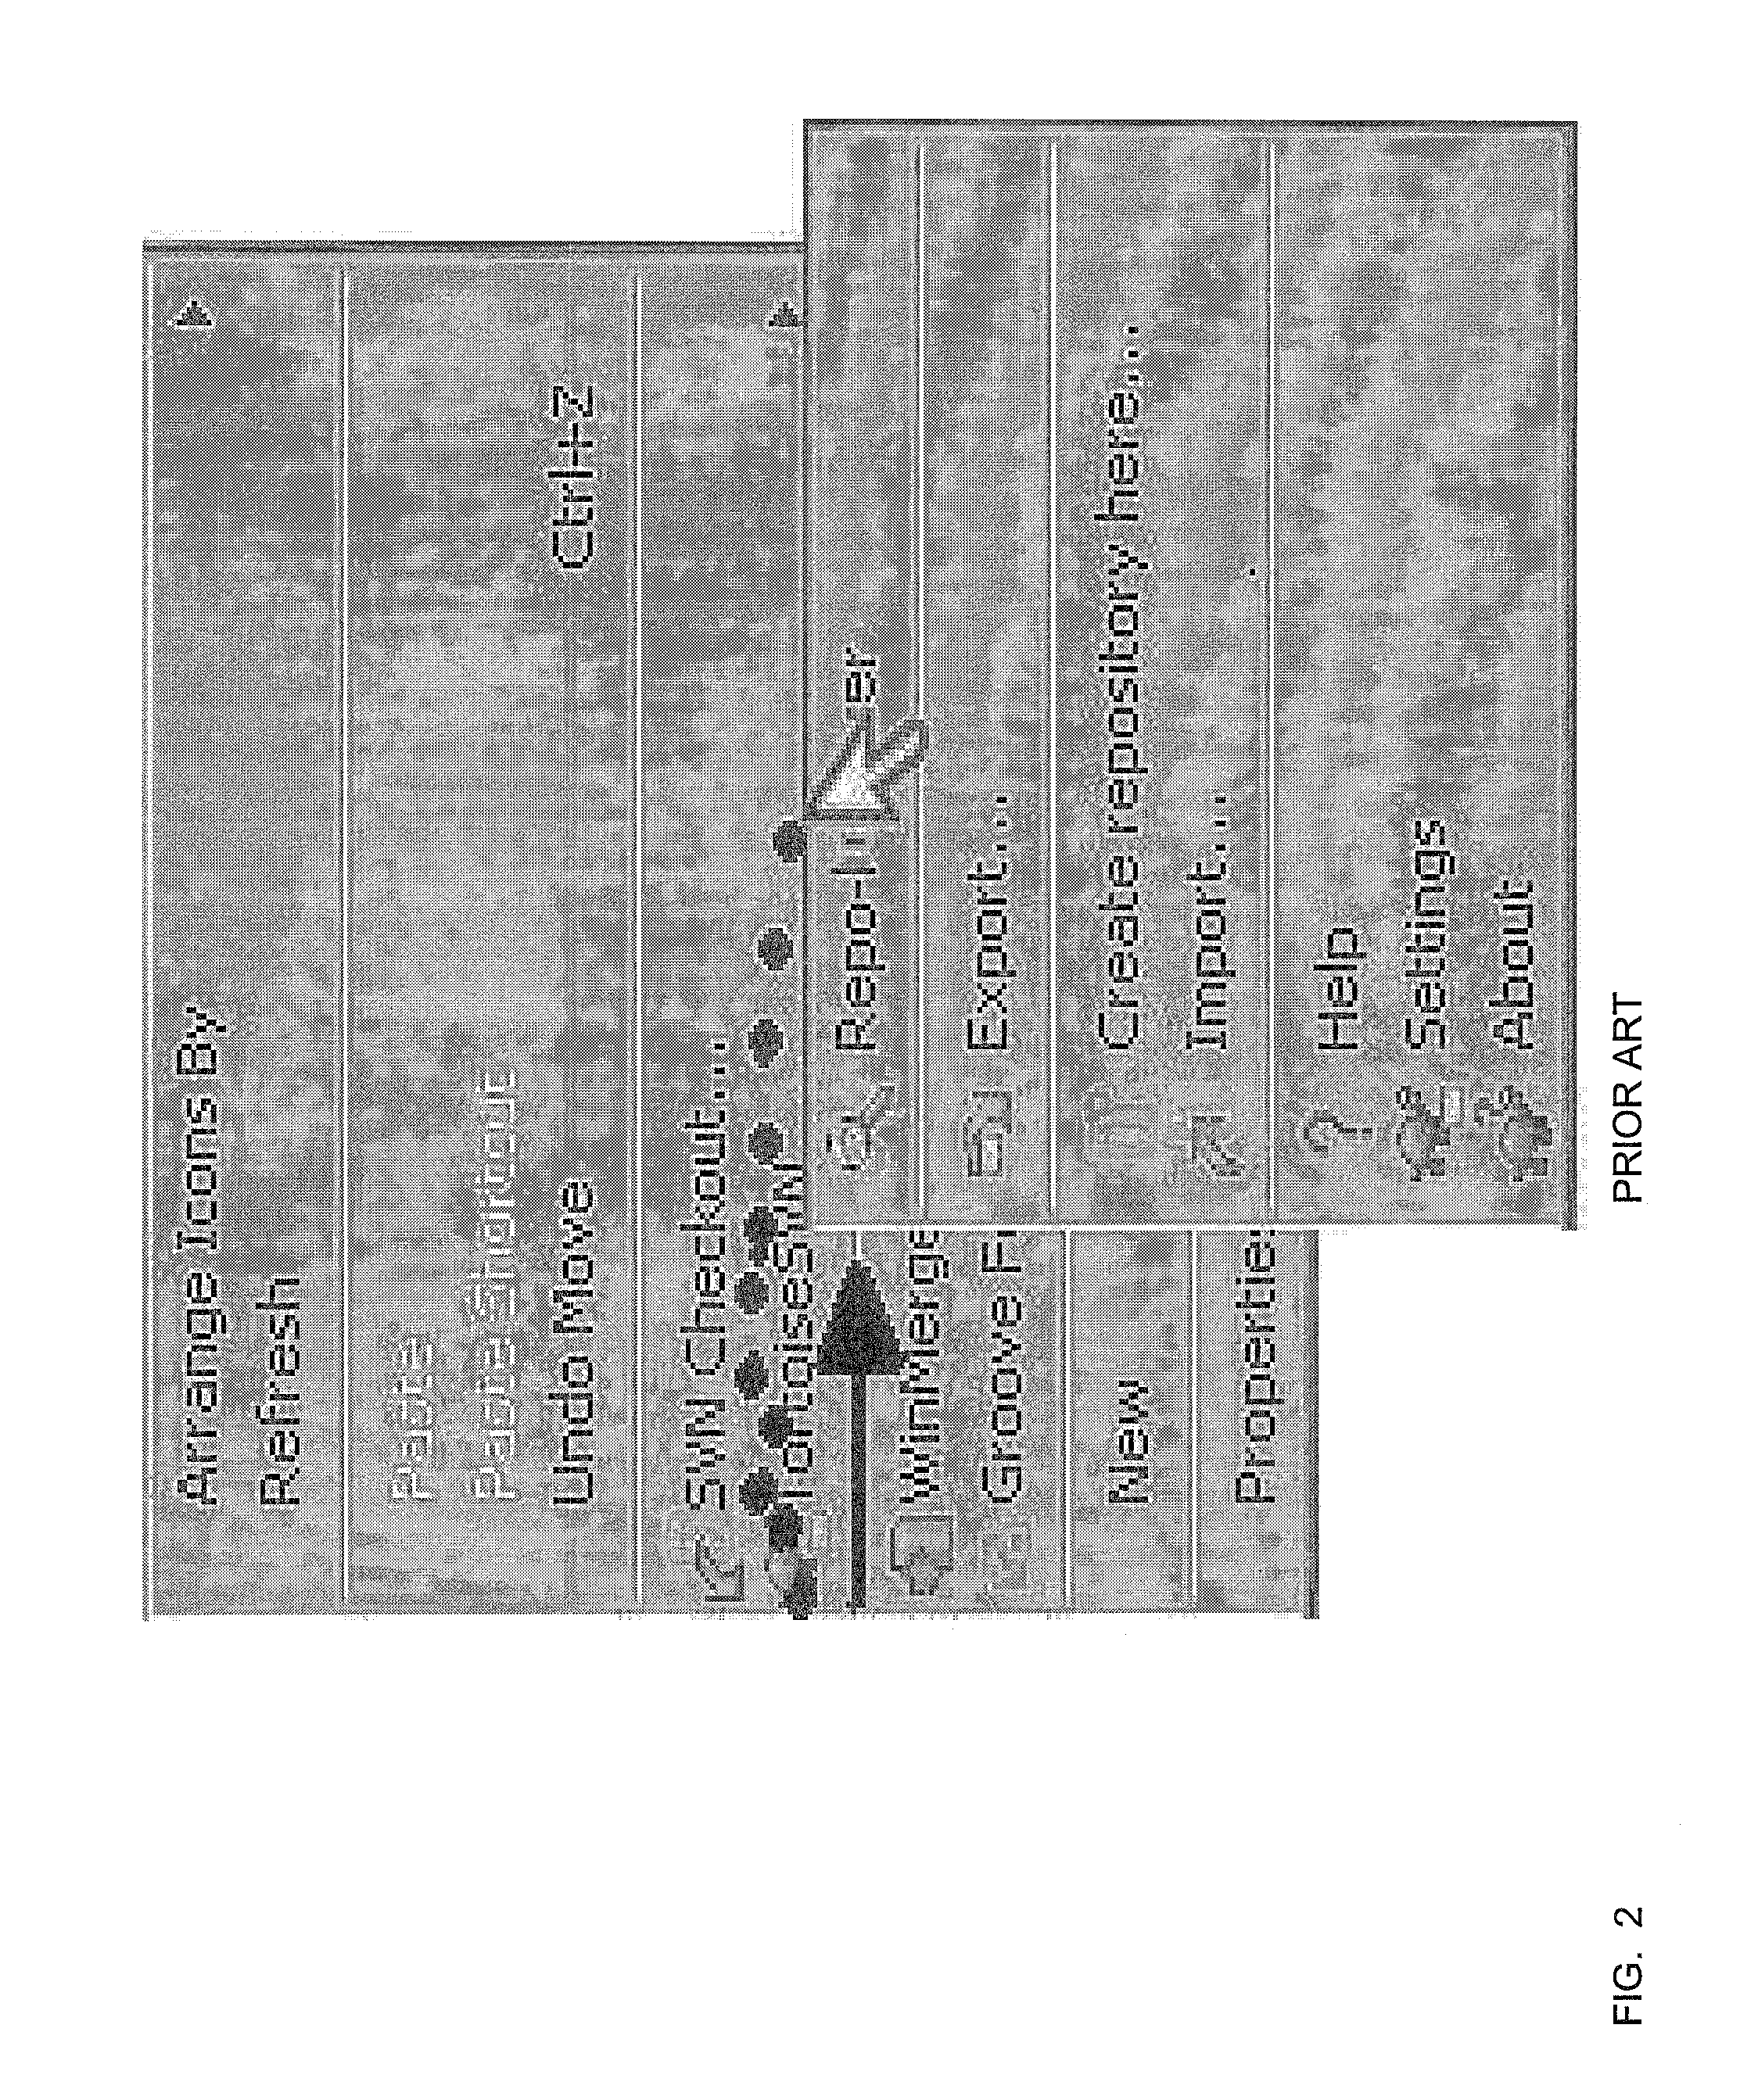 Selectable parent and submenu object display method with varied activation area shape